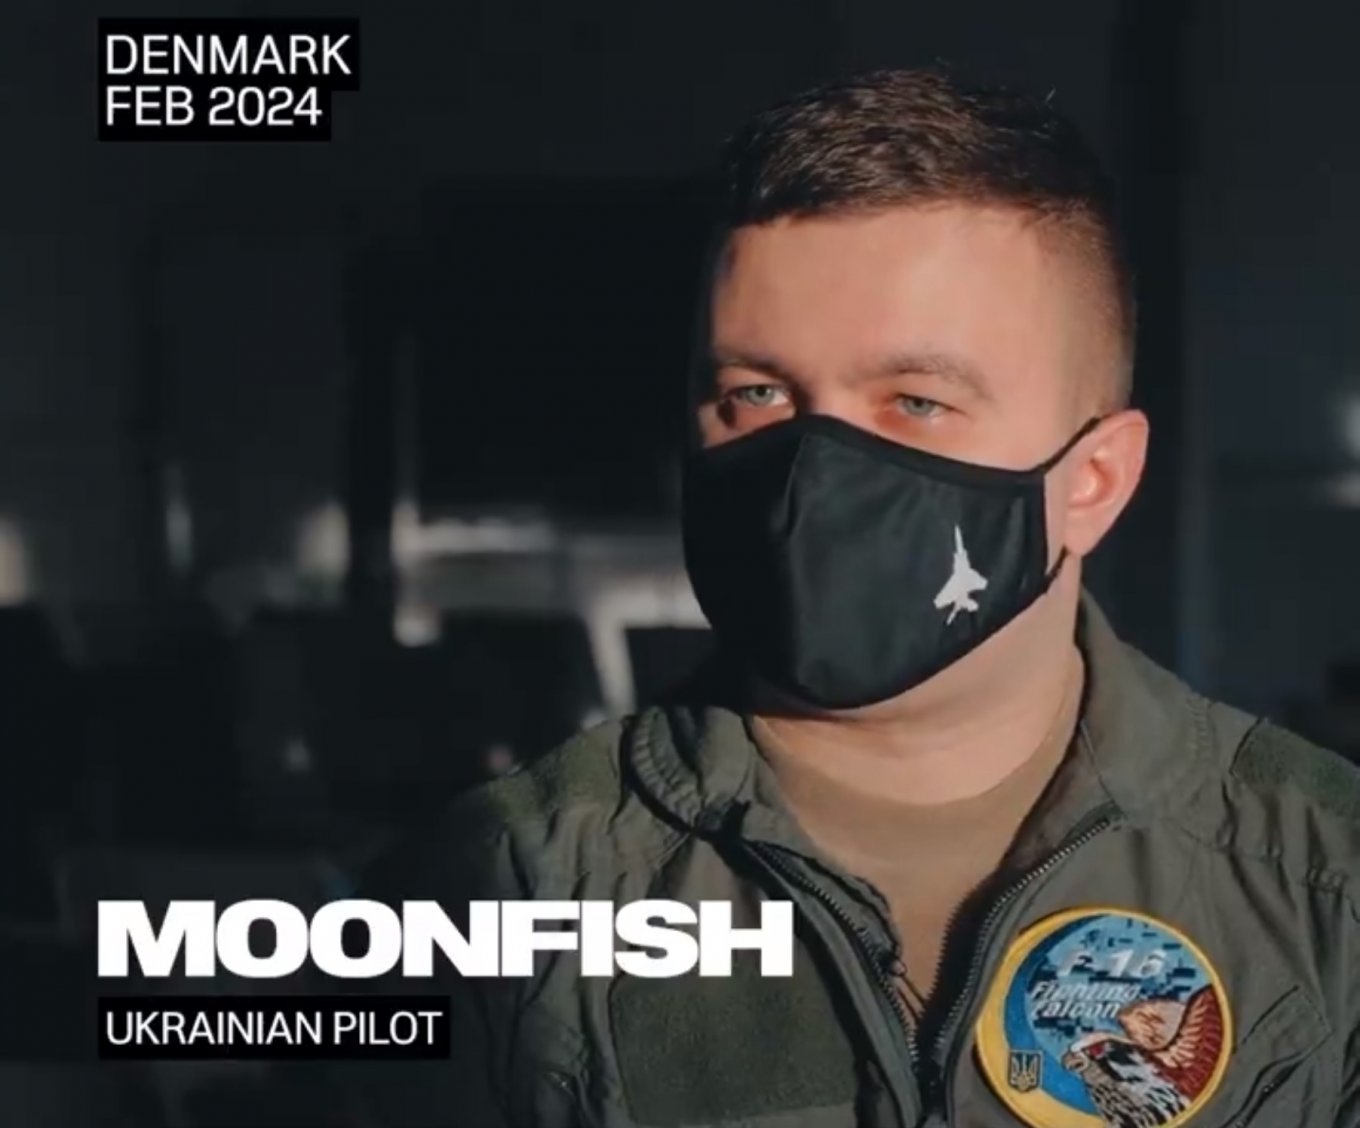 A Video of How Ukrainian Pilots Train on F-16 Fighter Jets in Denmark Goes Viral on the Internet Ukrainian pilot with the call sign Moonfish, Defense Express